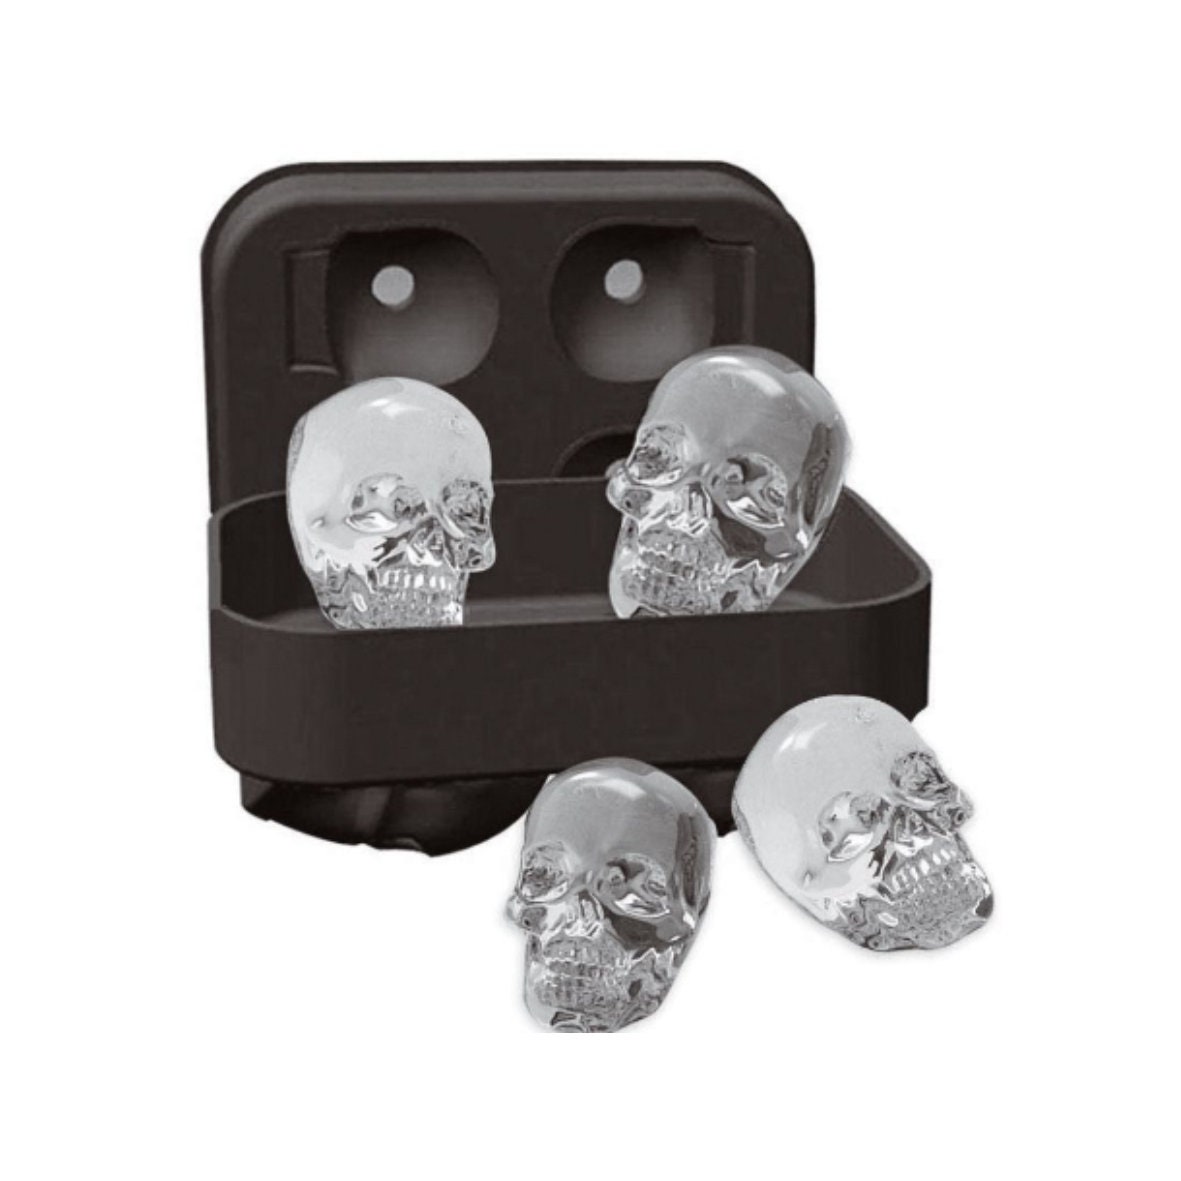 Stritra 3D Skull Silicone Ice Mold: $6, 'Perfect for Halloween